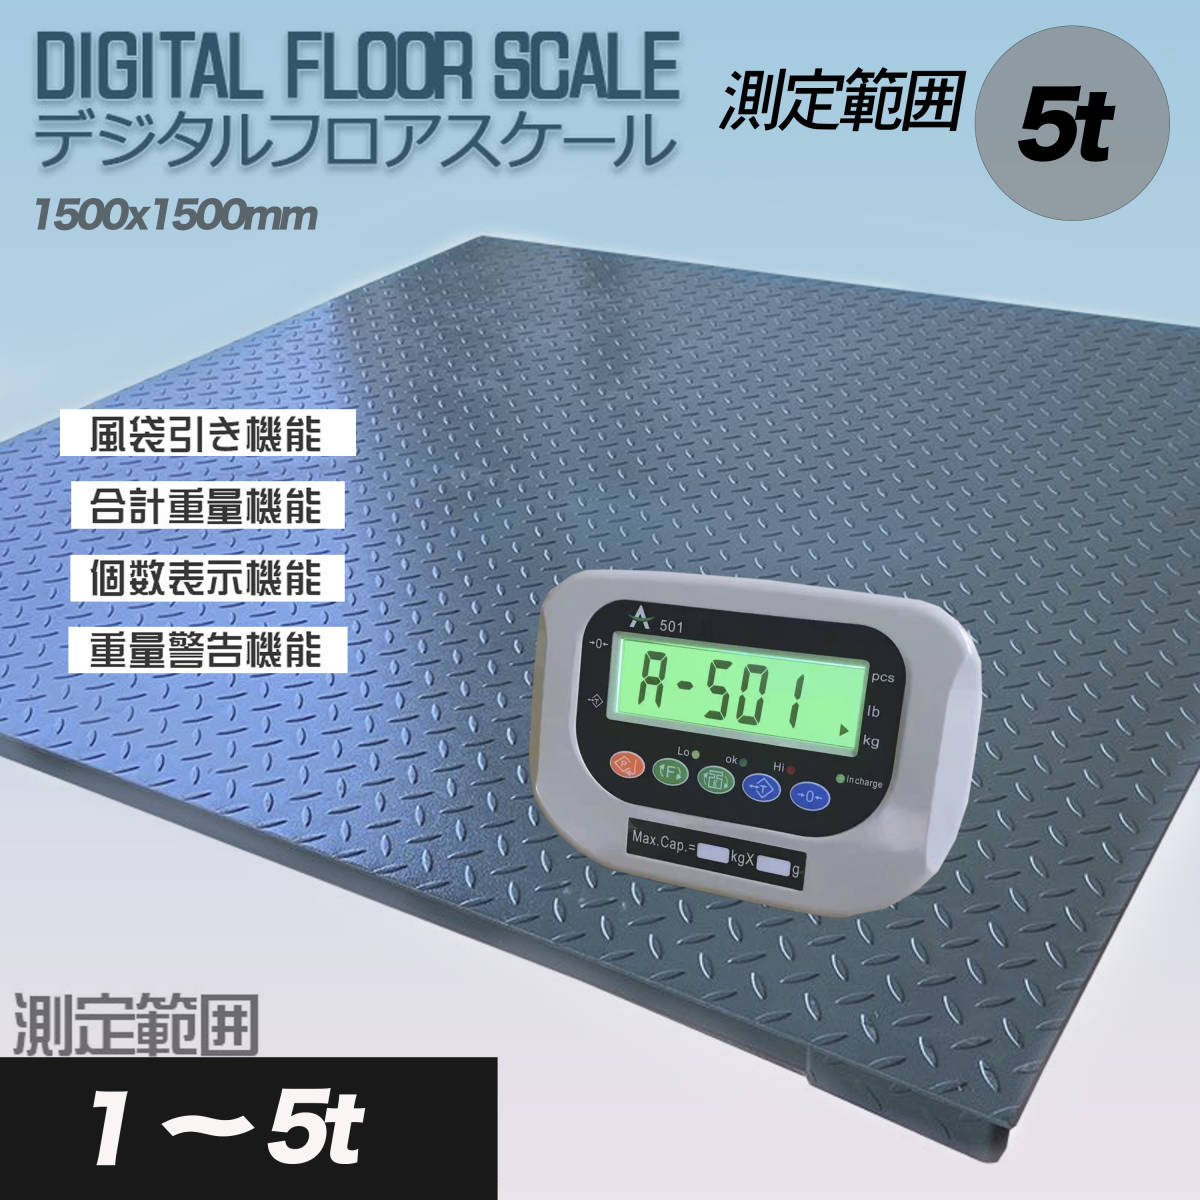  immediate payment [1500.LED floor scale 5T]5t digital type floor scale 1500. pcs scales low floor type measurement vessel manner sack discount * total weight * number display 